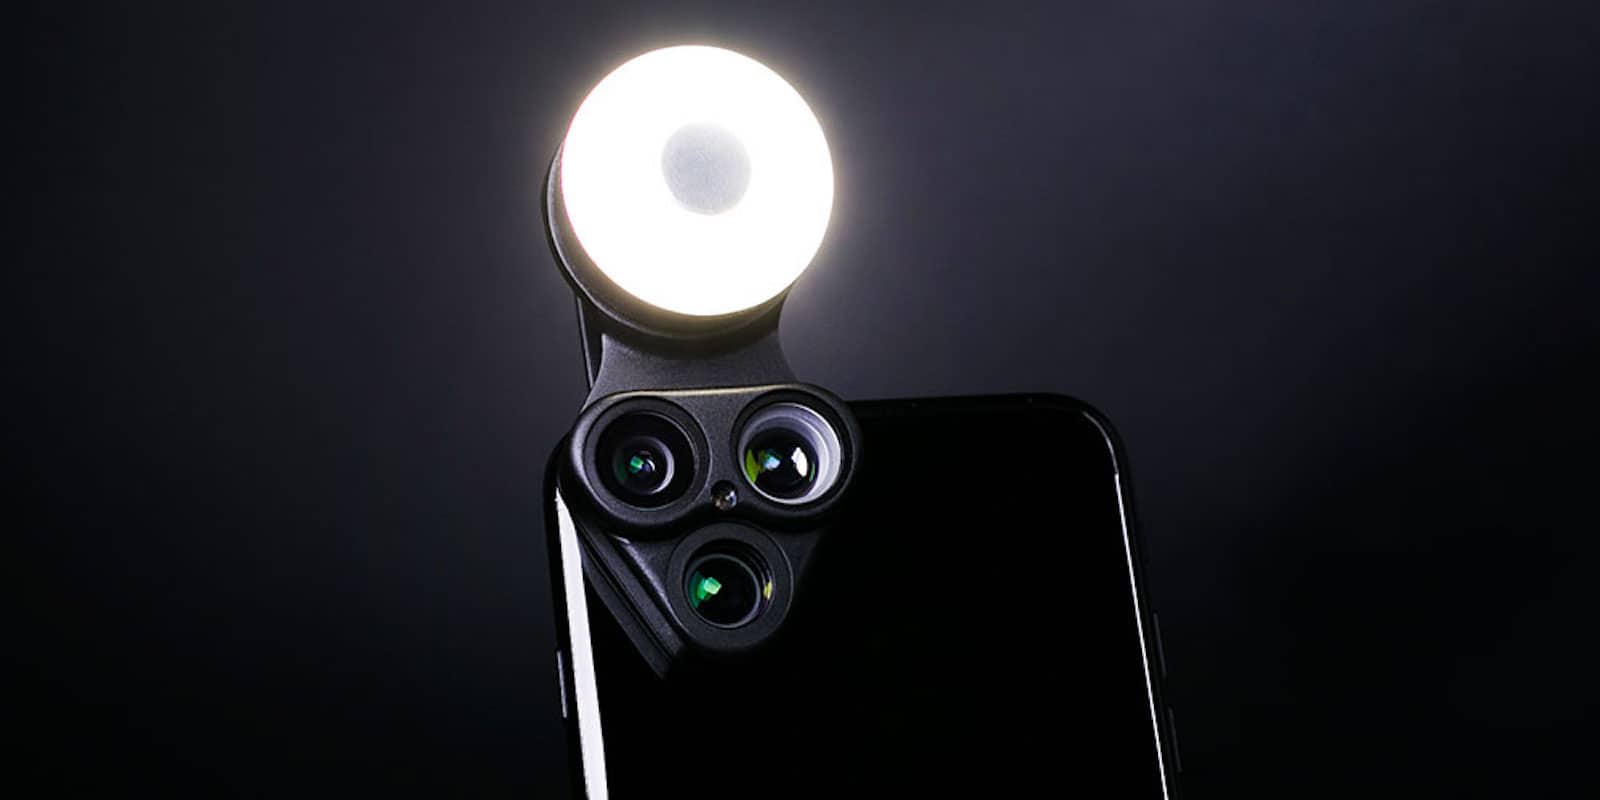 Instantly add 3 new lenses, an LED light, and a selfie mirror to your smartphone.